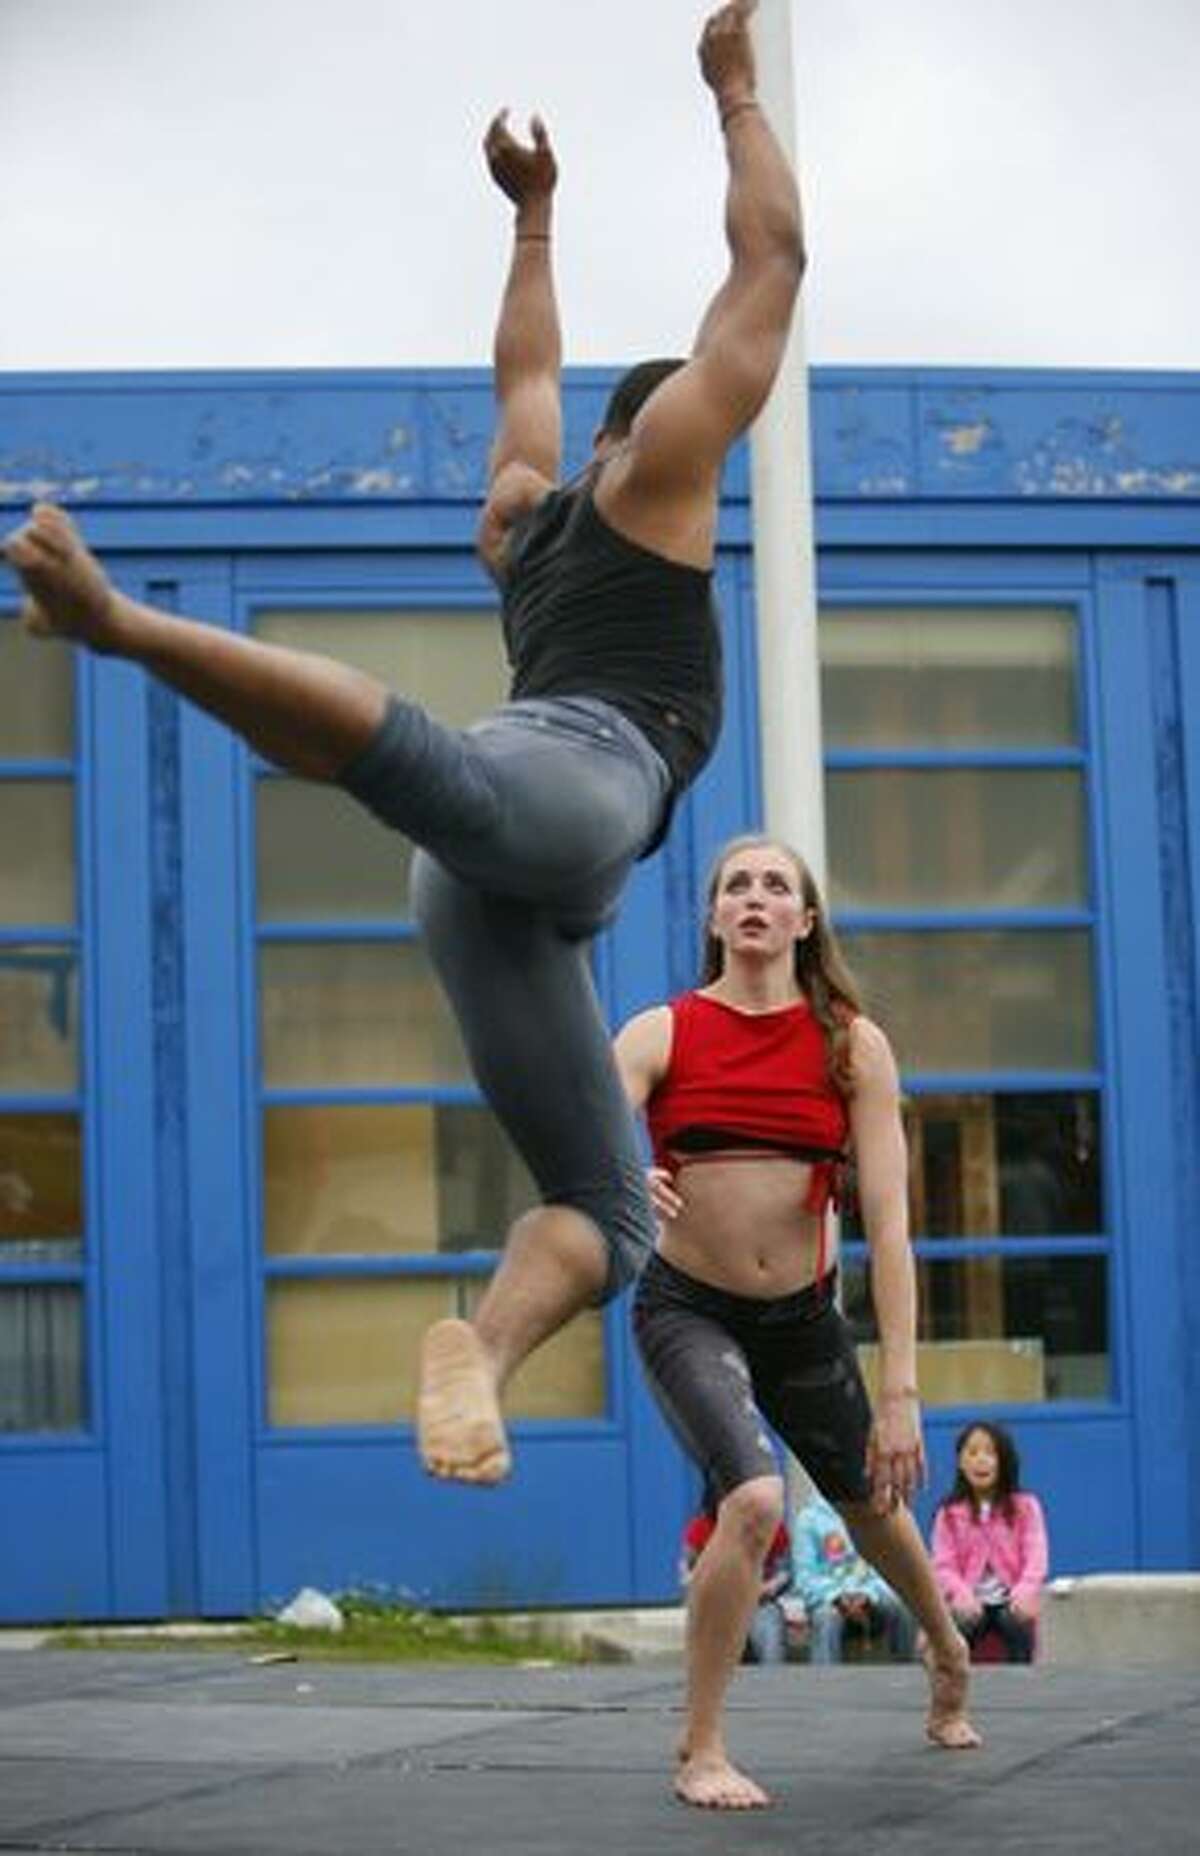 Dancer Isaiah Sumler leaps toward Christina Cooley during a performance by DASSdance during a Juneteenth community celebration hosted by the Atlantic Street Center at the Rainier Beach Community Center on Thursday June 17, 2010. Juneteenth is a holiday that commemorates African American freedom from slavery, while emphasizing education and achievement. This is the 10th year the Atlantic Street Center has hosted the celebration in Seattle.